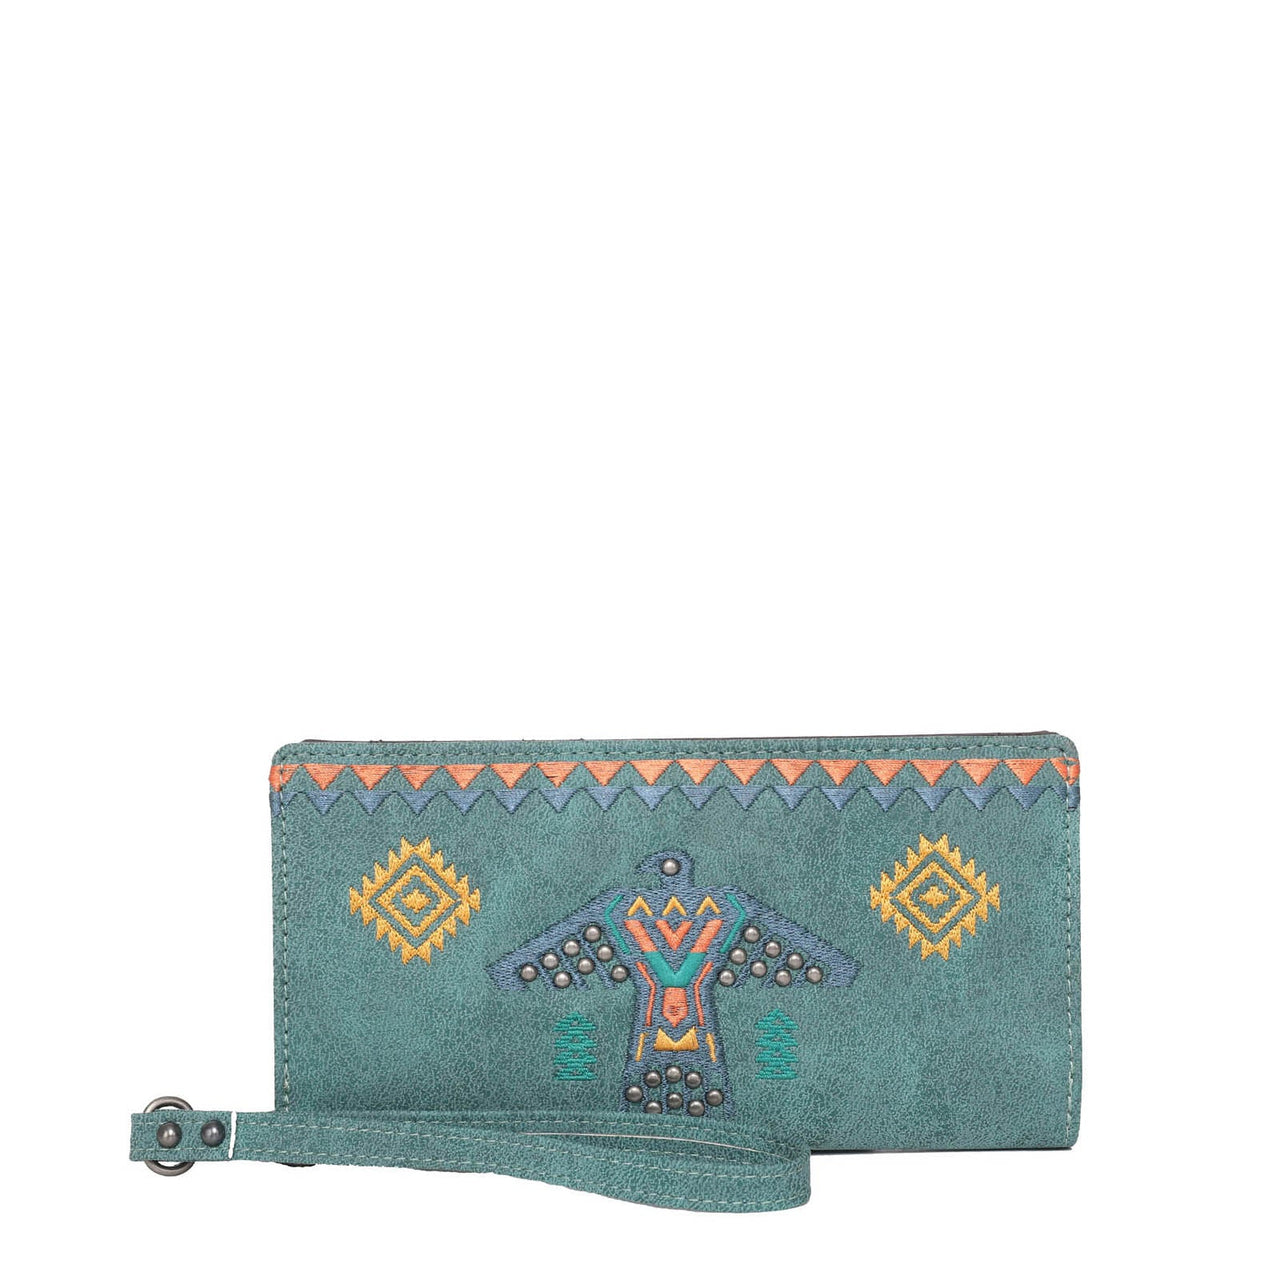 Wrangler Women's Embroidered Aztec Eagle Fringe Collection Wallet - Turquoise